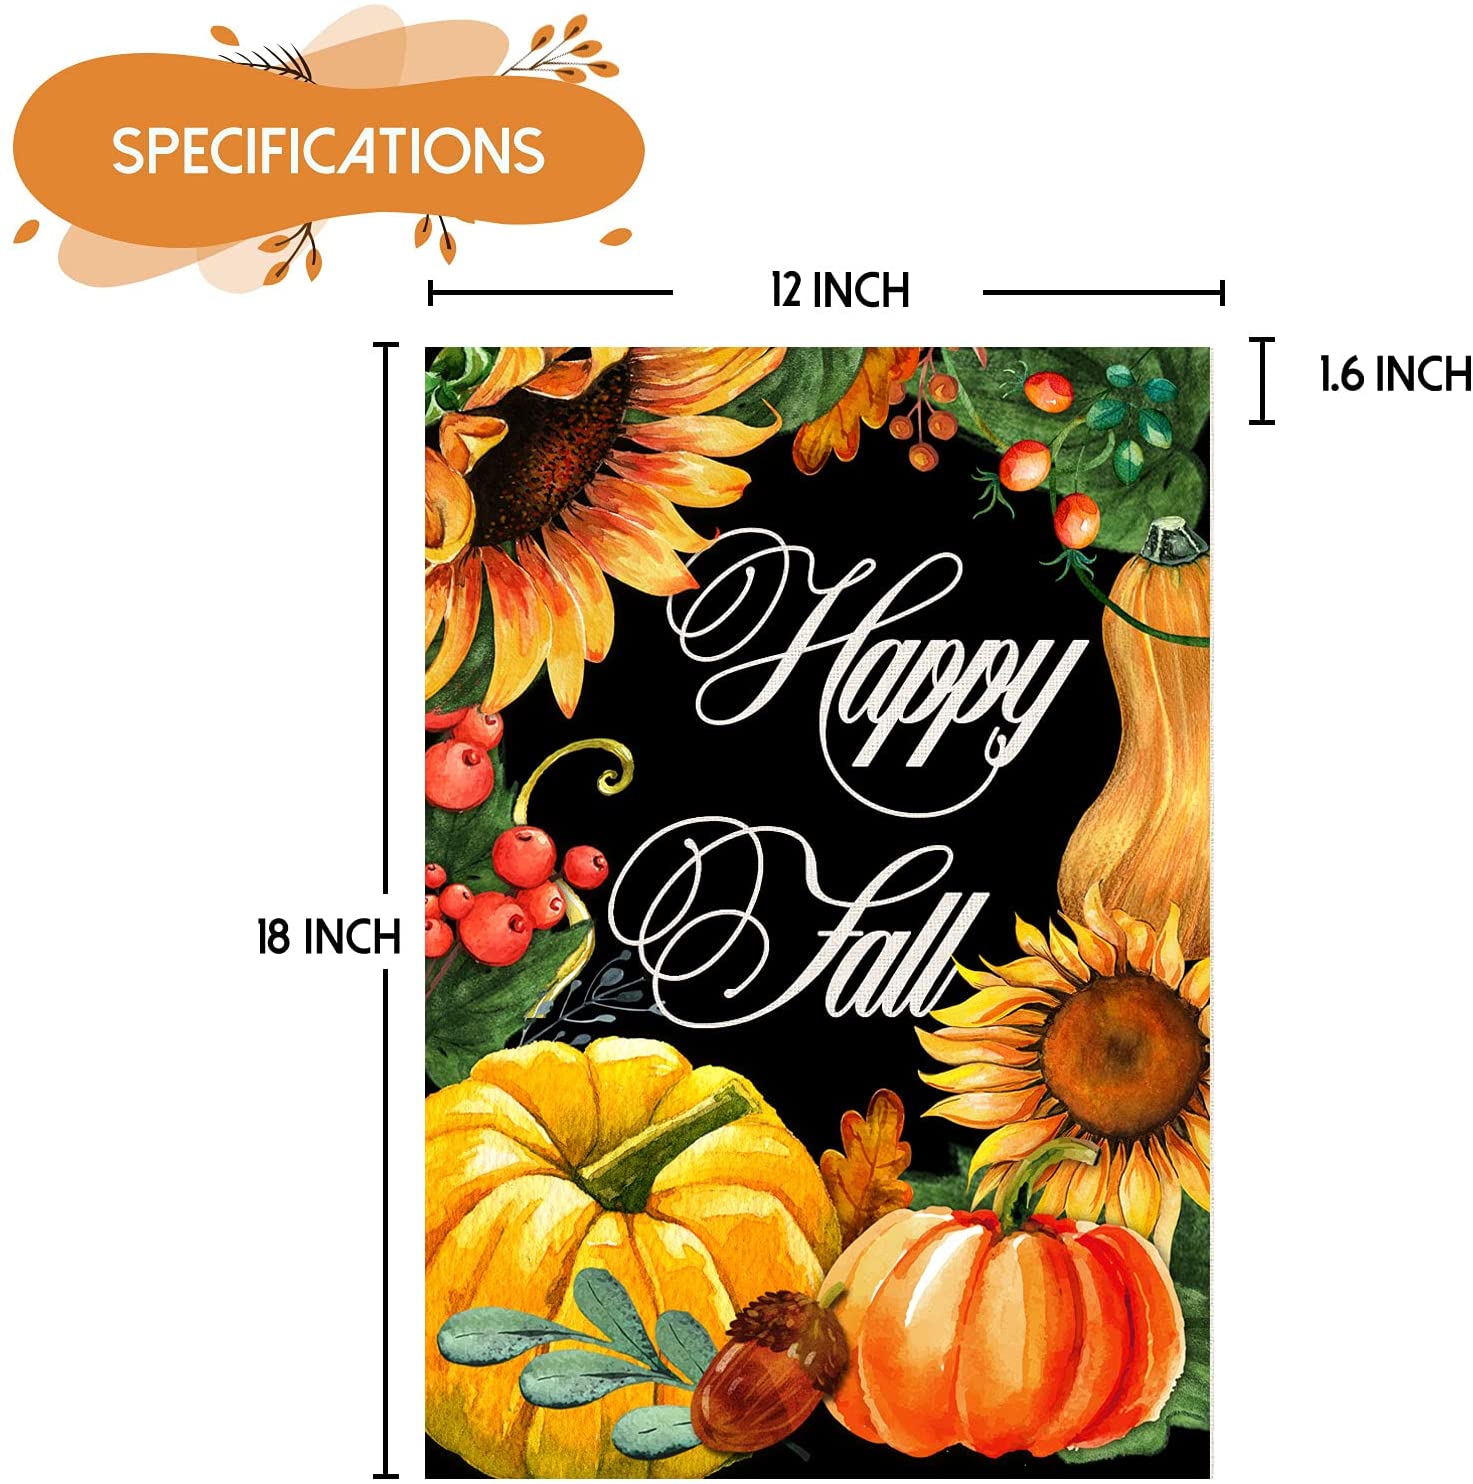 2 Pcs Happy Fall Garden Flags Double Sided 12 x 18 (Sunflower, Bicycle)